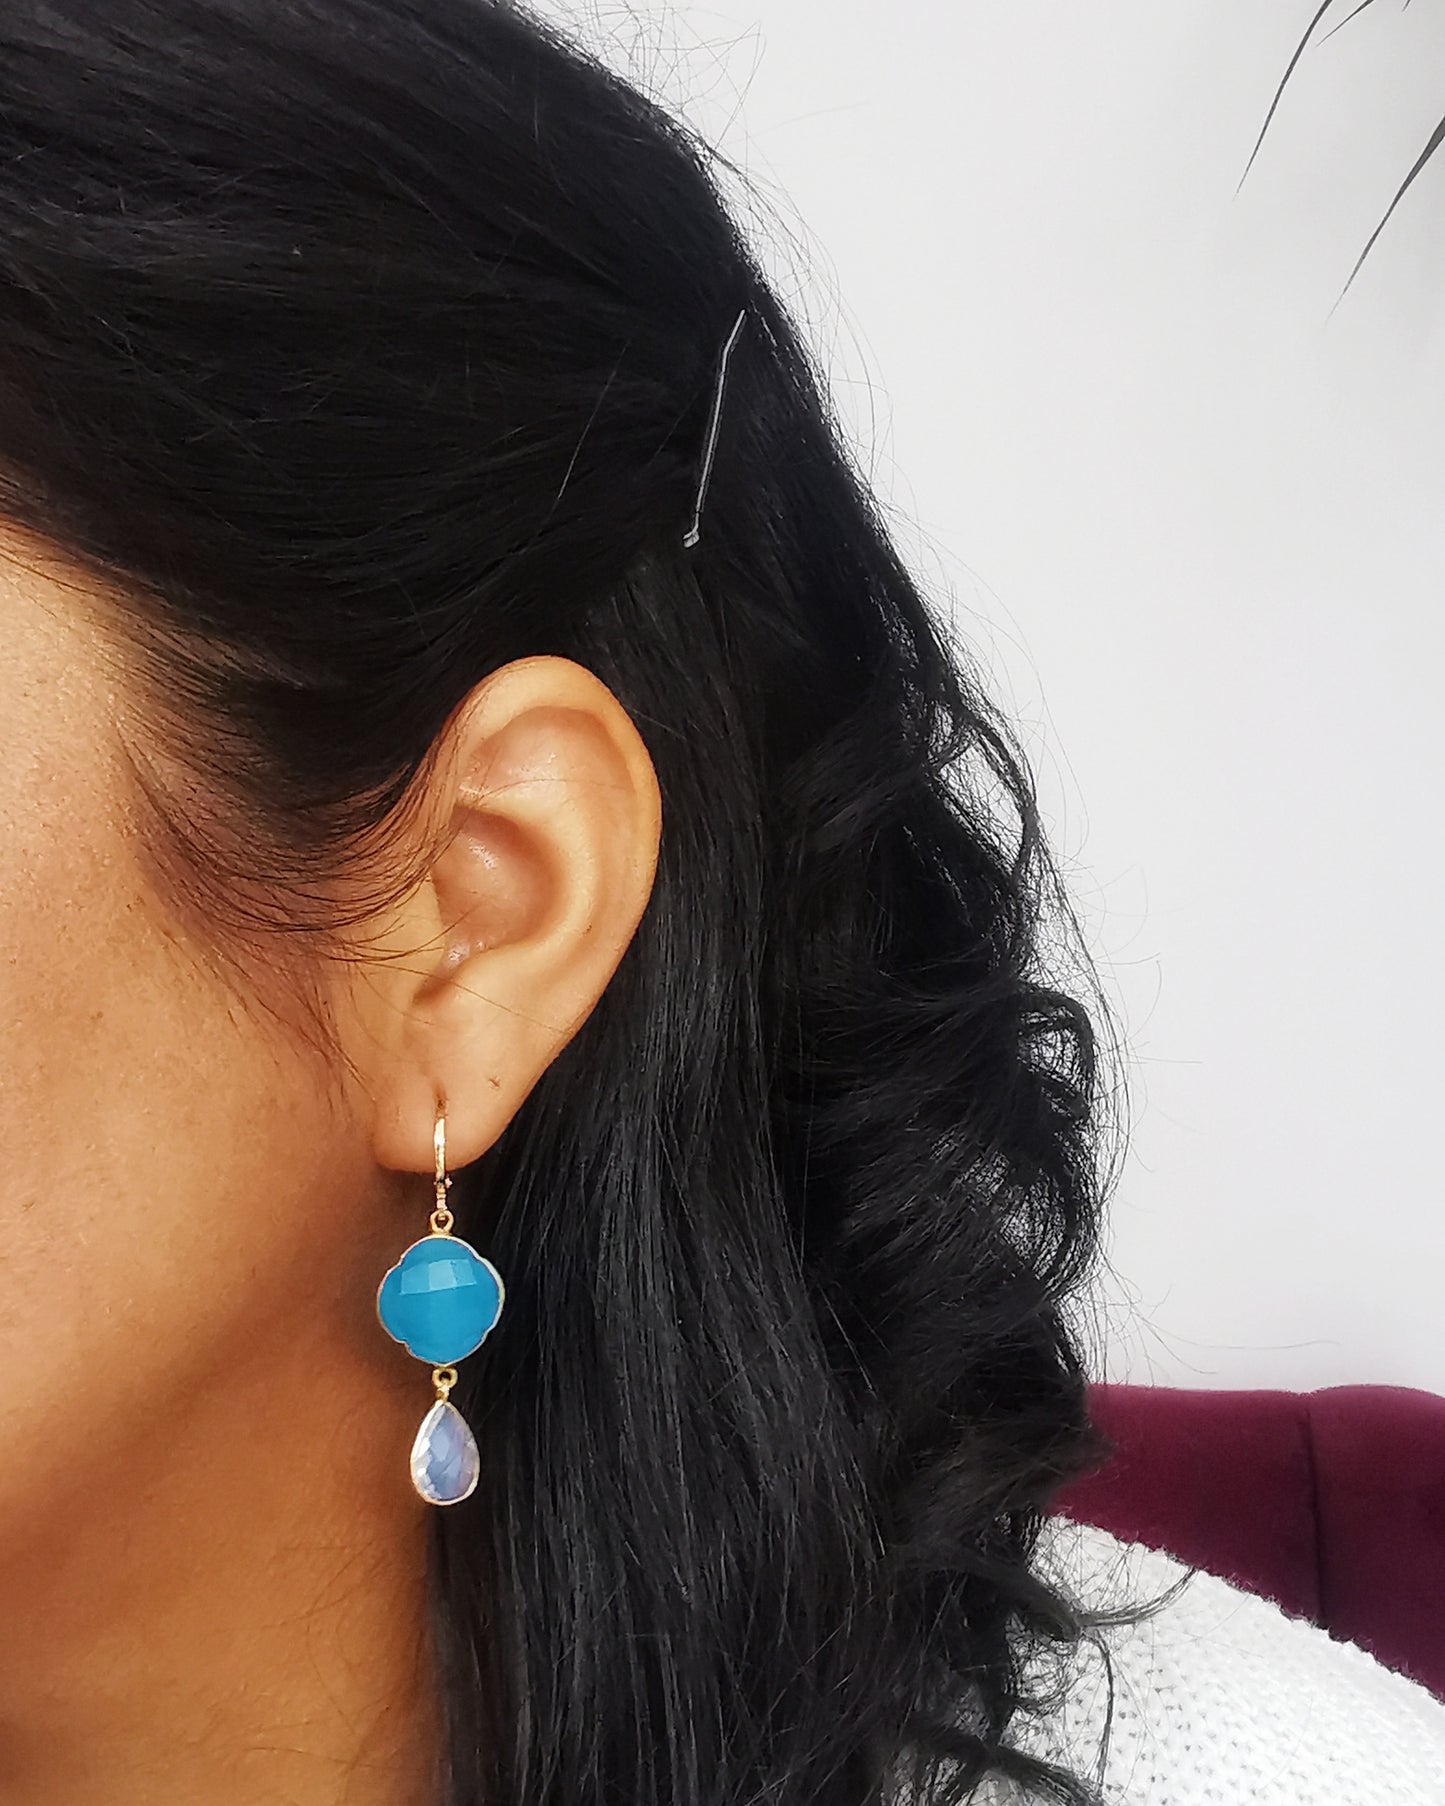 Blue Chalcedony and Opalite Clover Earrings - LIMITED EDITION - Vinta Shop